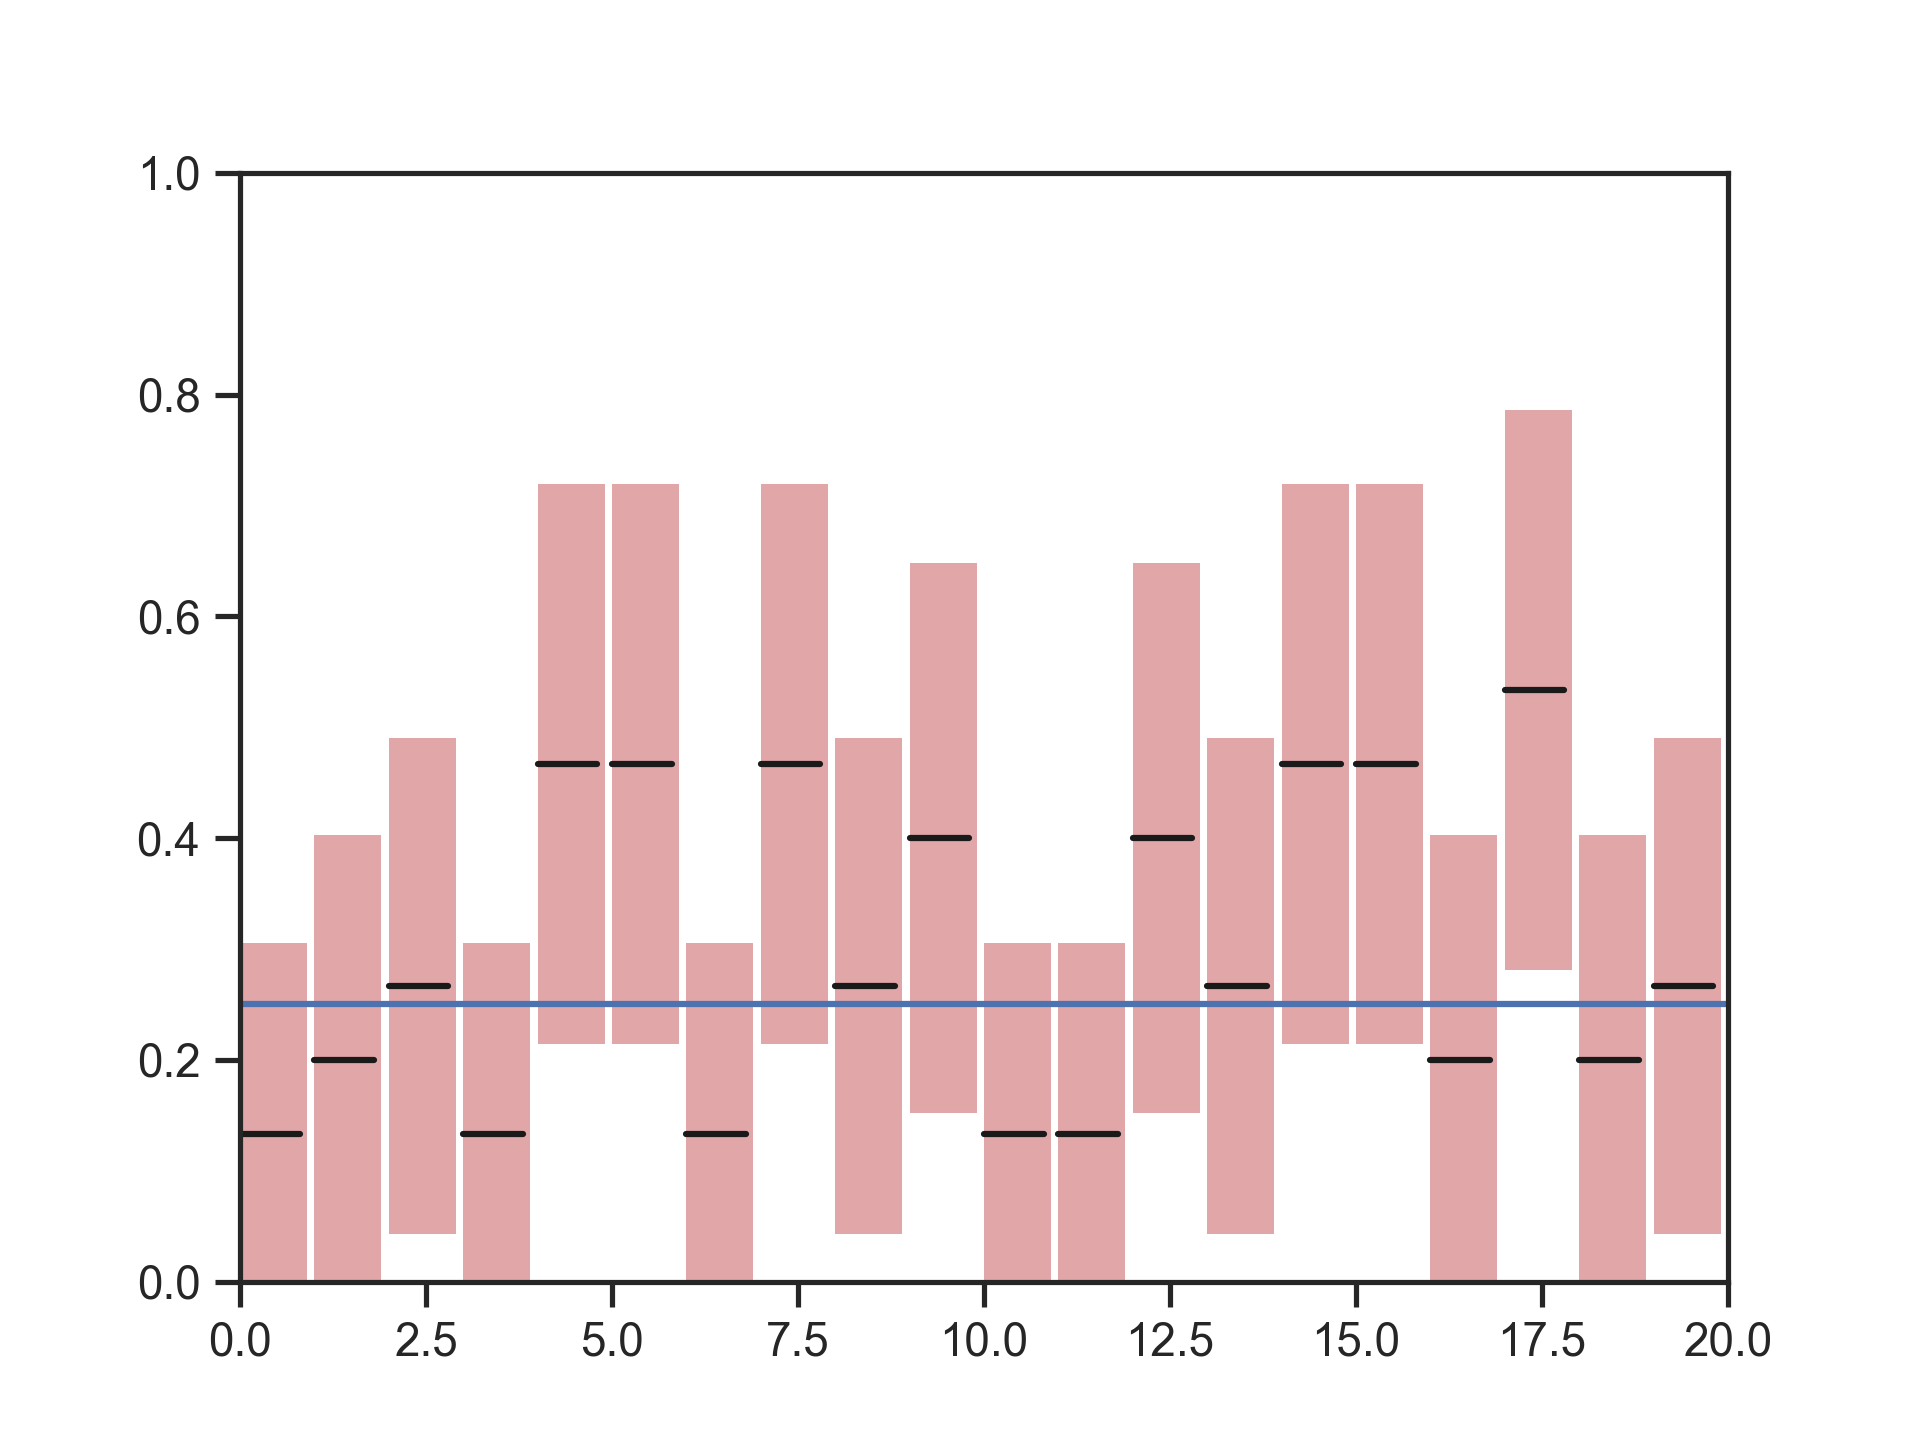 Figure 1: Confidence intervals of 20 samples from a binomial distribution B(15,0.25)